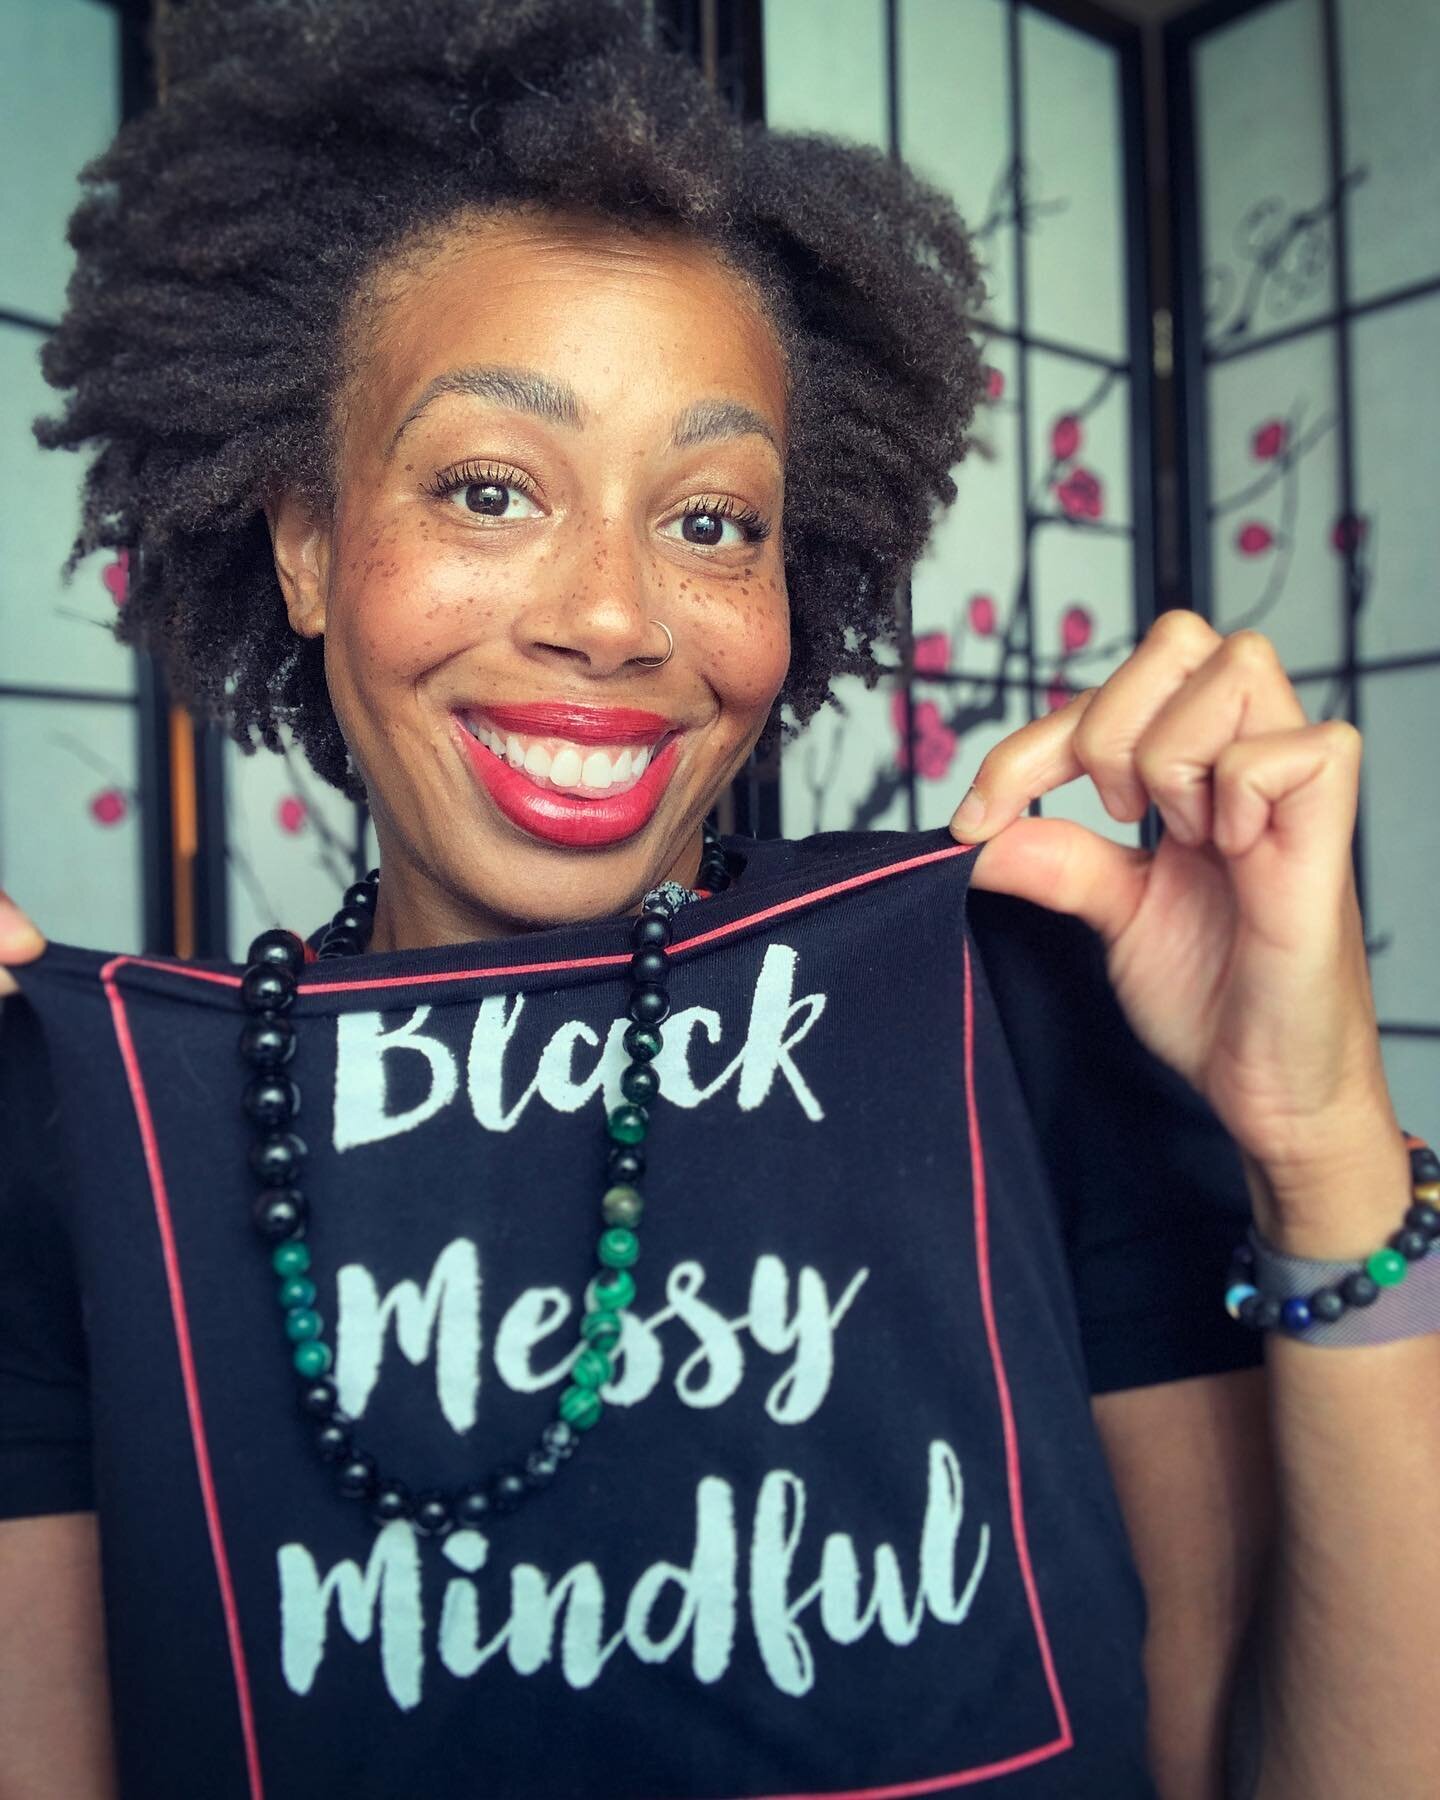 Happy Juneteenth! Here&rsquo;s a little #BlackJoy for your timeline on today ❤️🖤💚⁣⁣
⁣
I&rsquo;ve been up to a lot lately so here&rsquo;s a quick run down! ⁣⁣
⁣⁣
🖤I&rsquo;m participating in June&rsquo;s VVirtual @witch_walk Centering Black Witches 